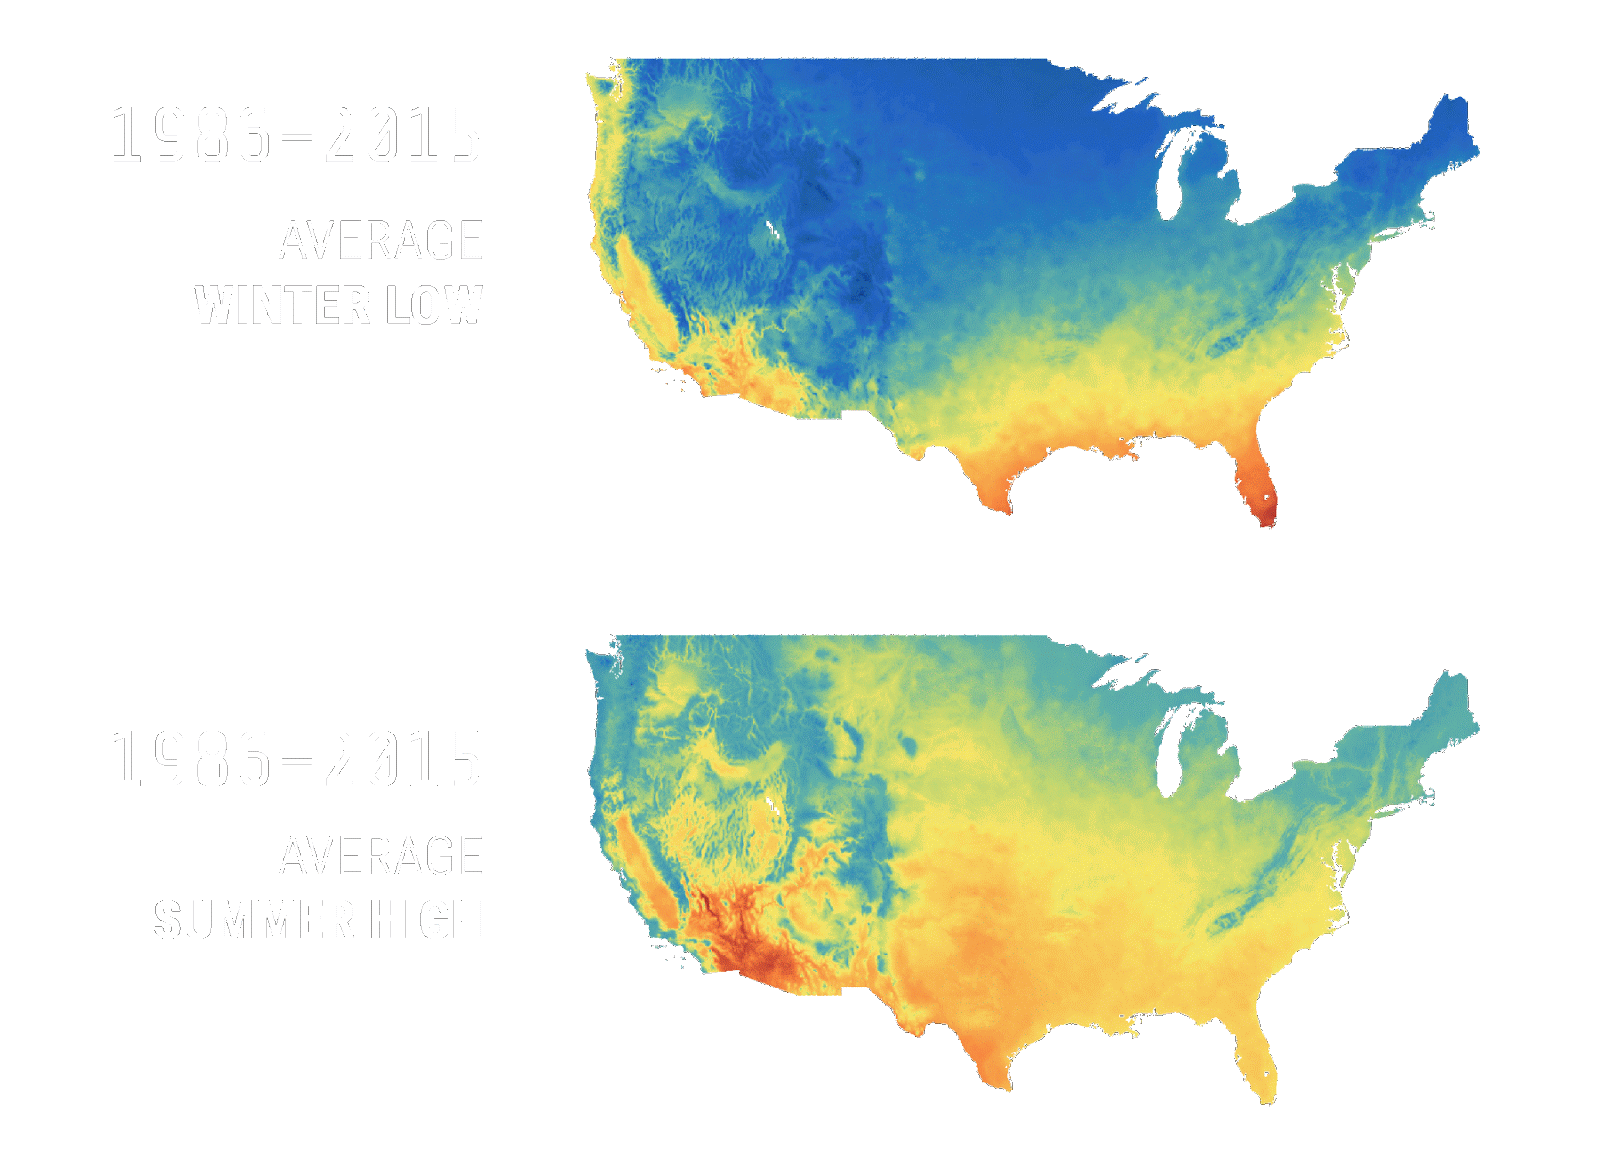 Climat change in the USA